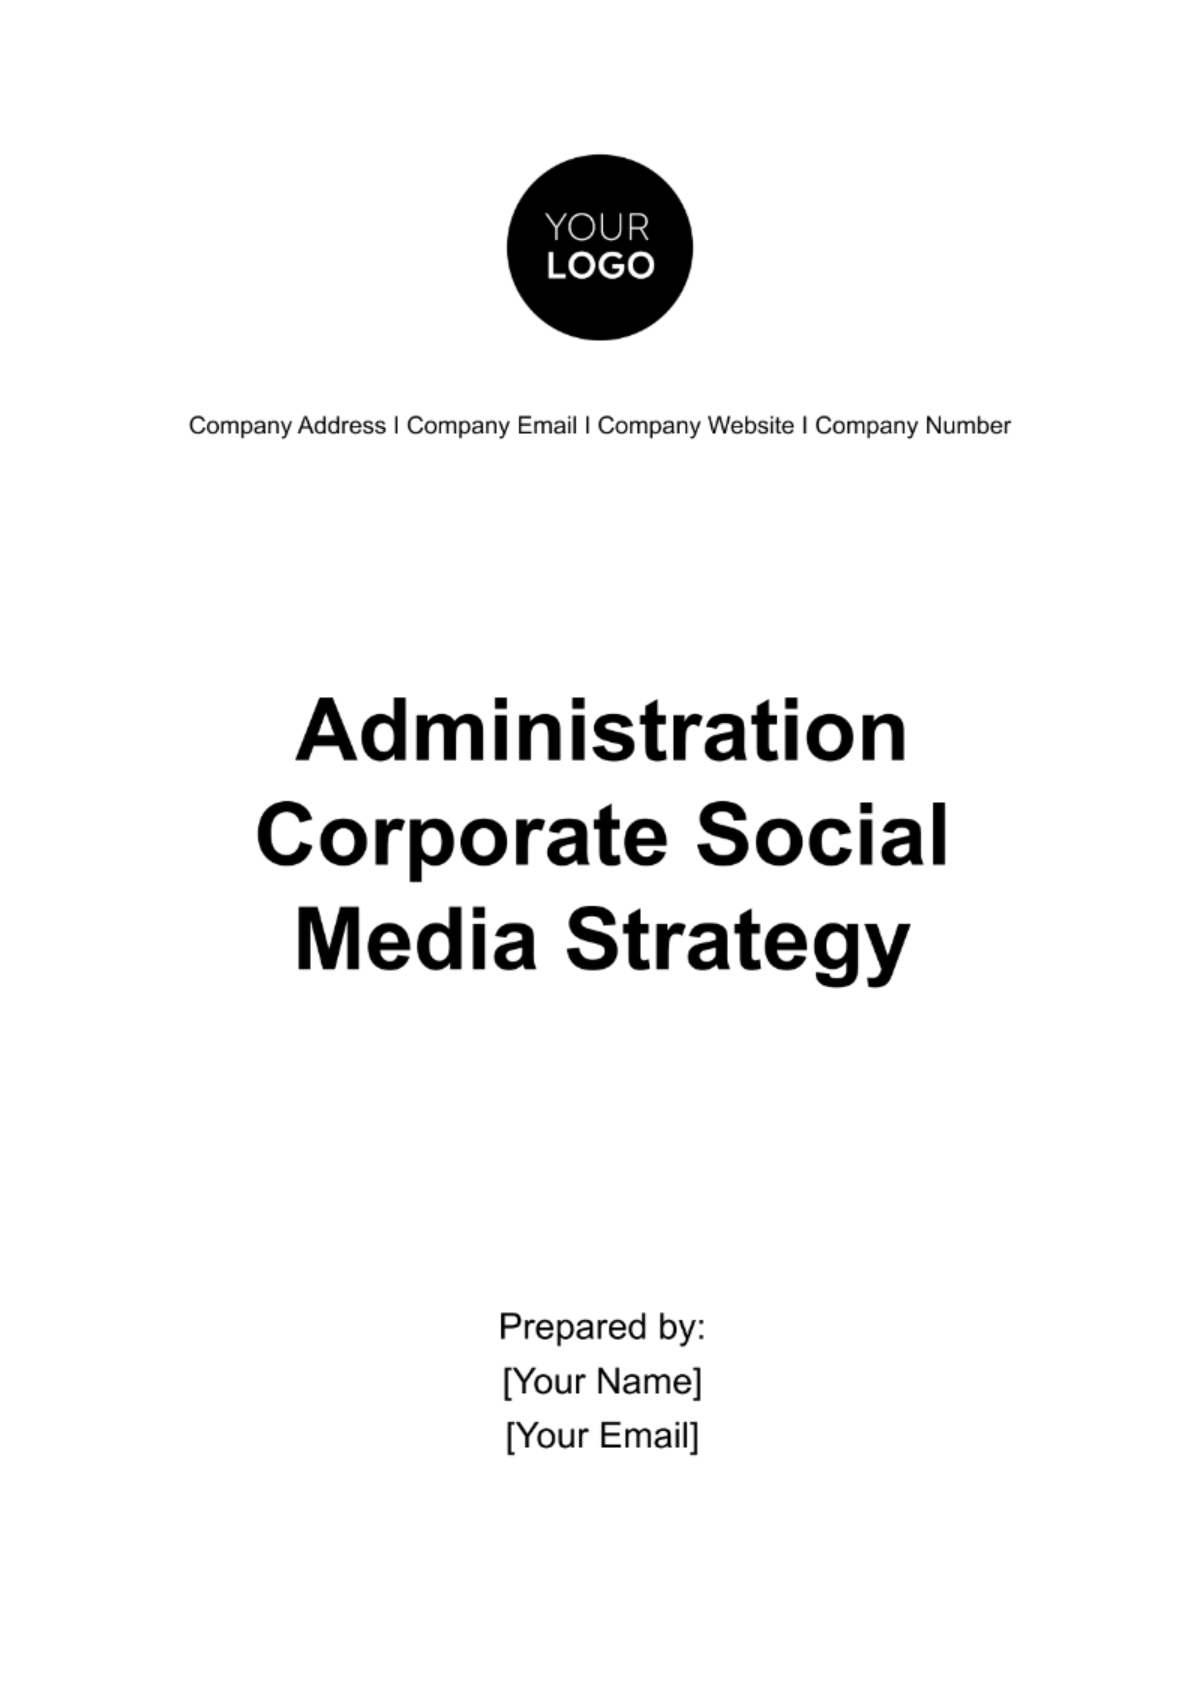 Administration Corporate Social Media Strategy Template